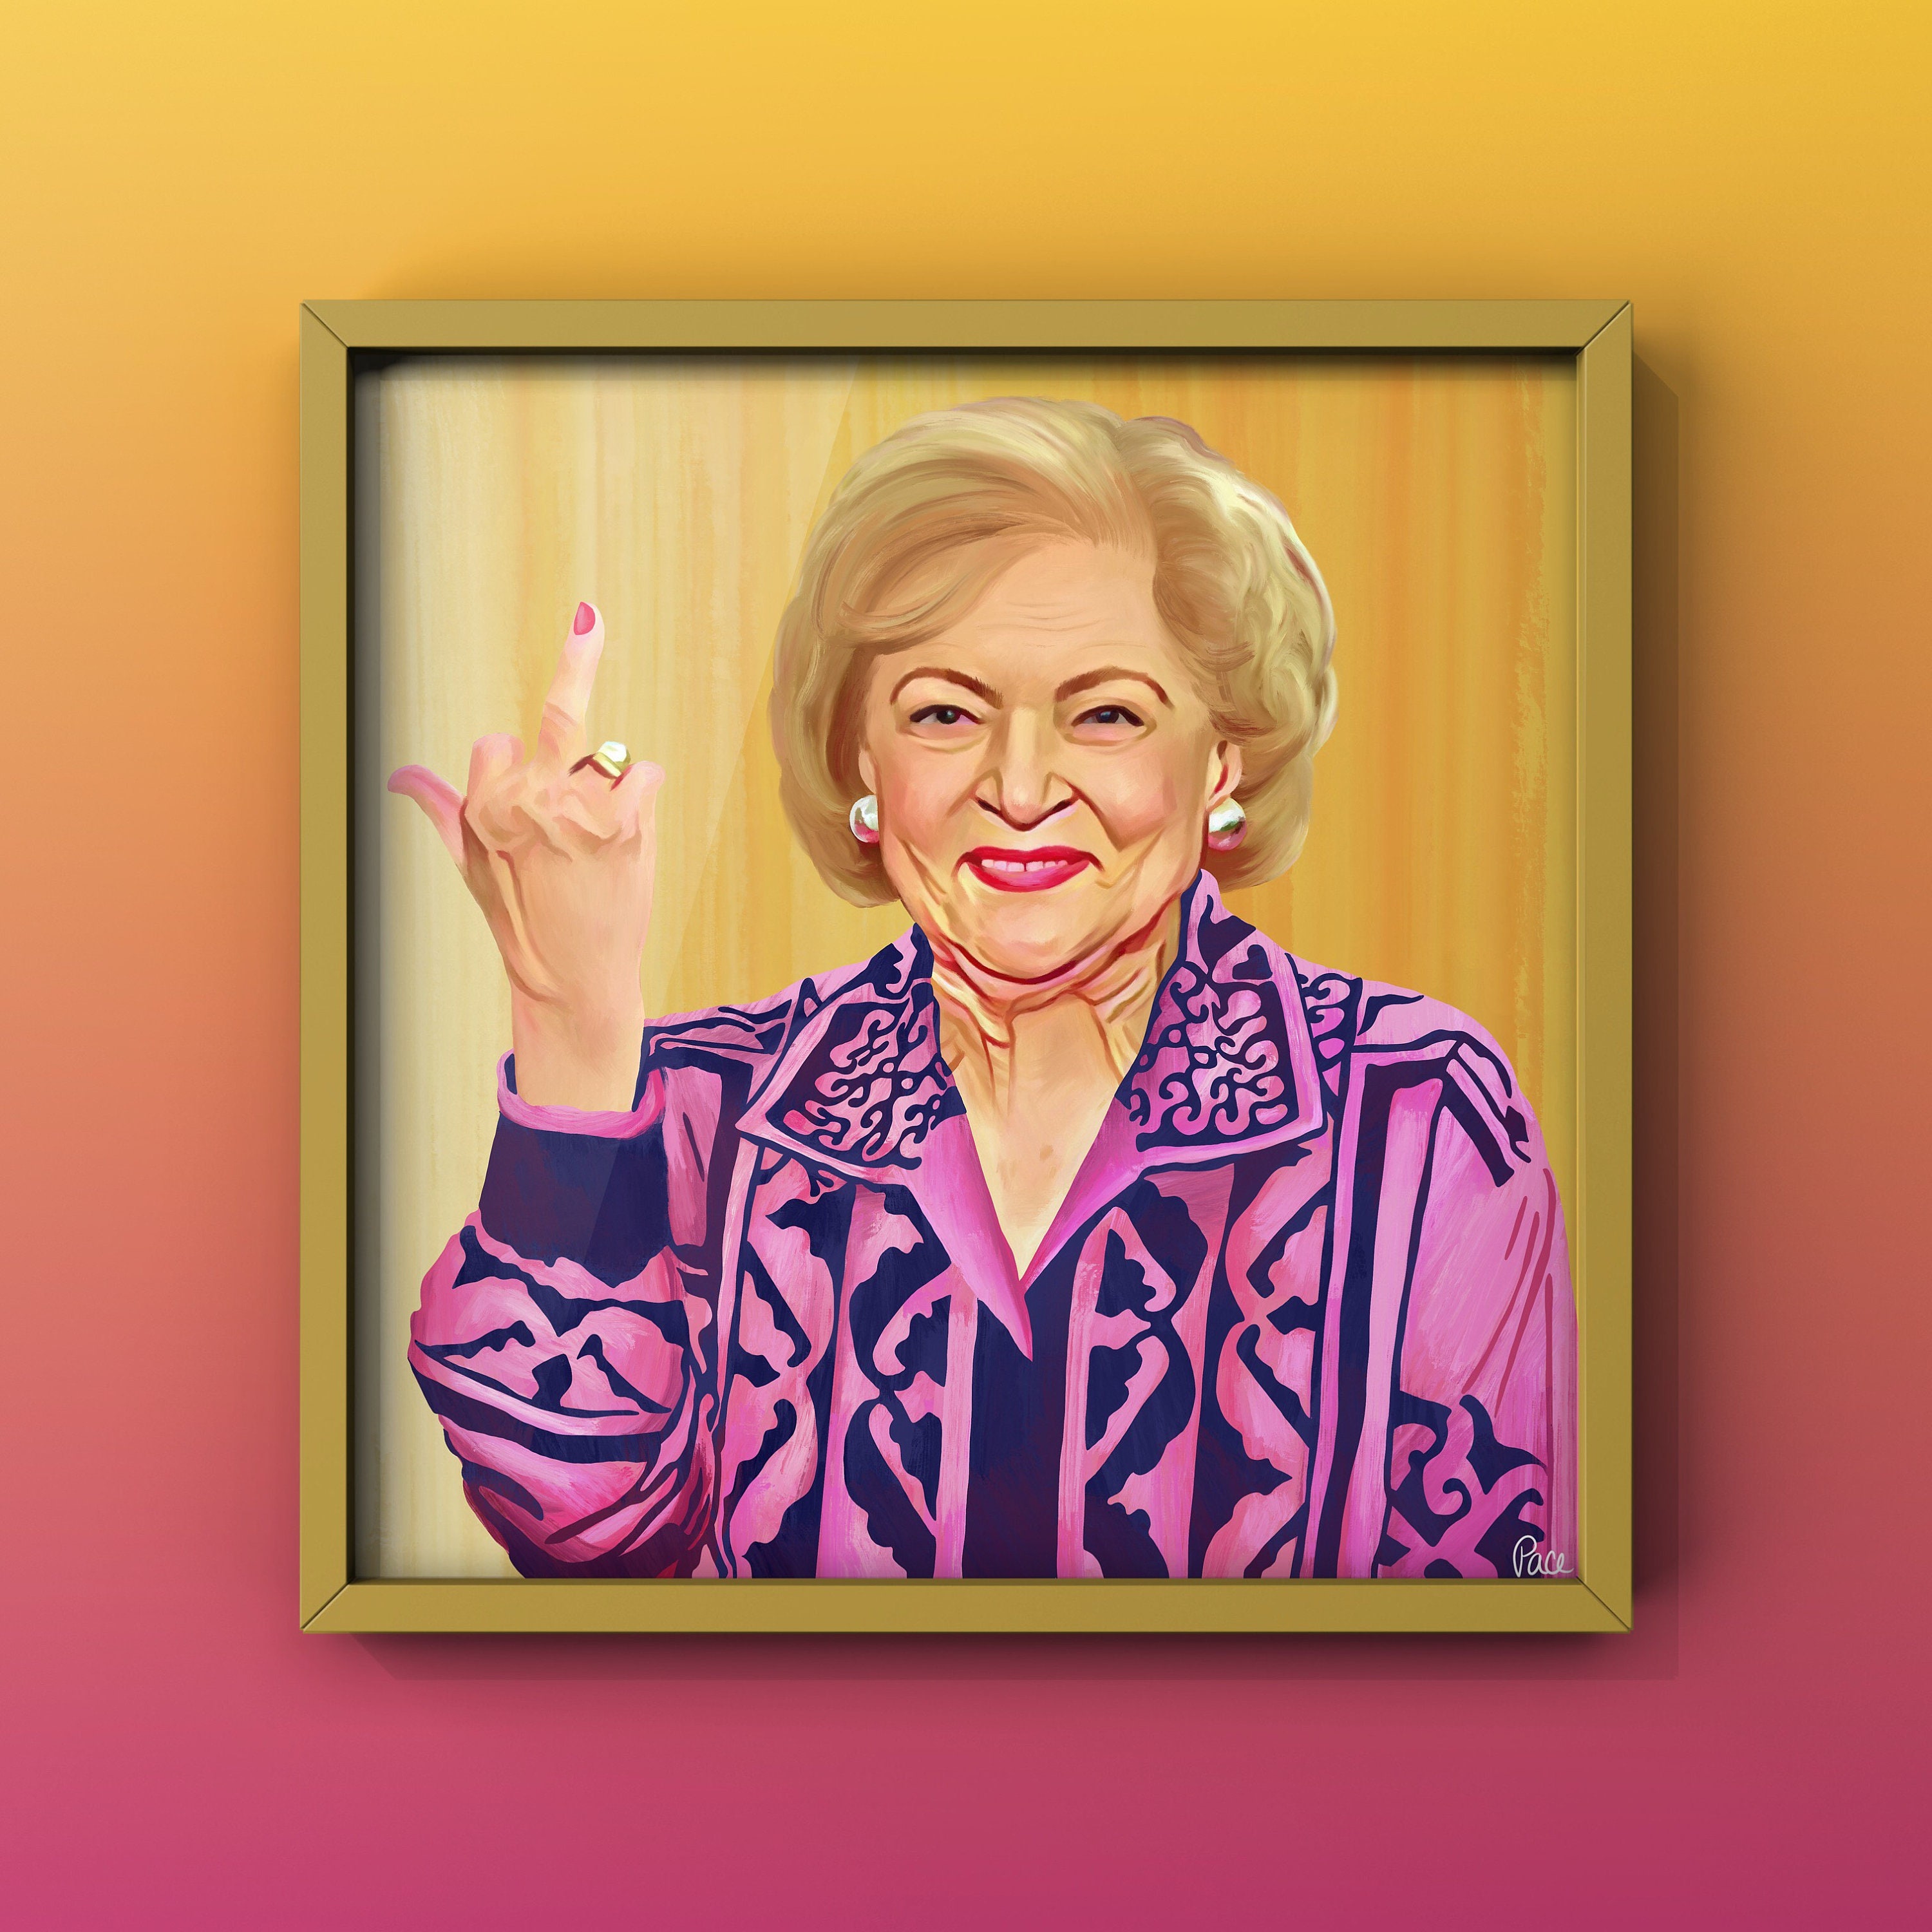 Classic TV Series The Golden Girls Diamond Painting Actor Betty White Wall  Art Cross Stitch Embroidery Picture Mosaic Home Decor